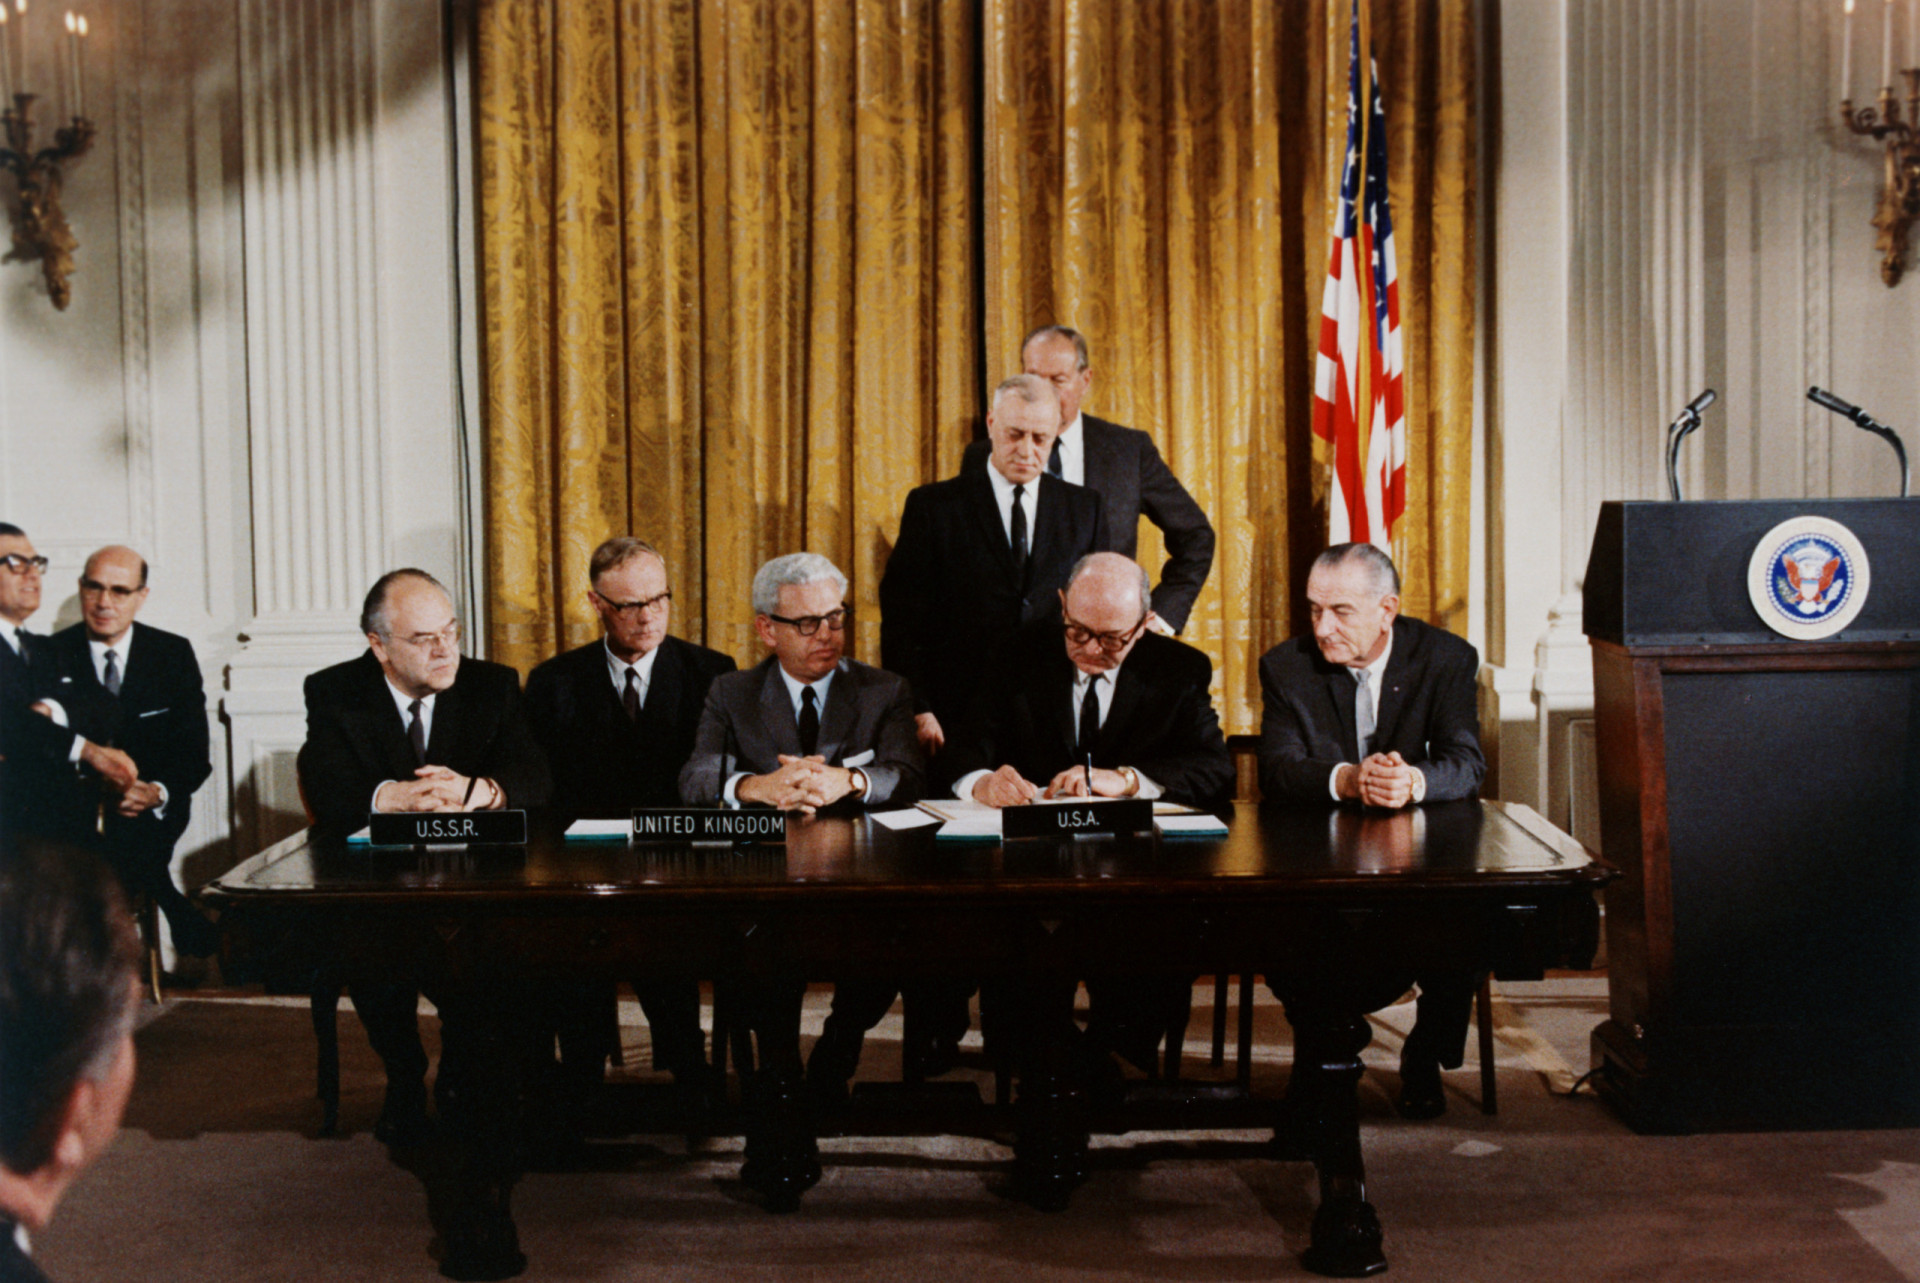 <p>The 1967 Outer Space Treaty, originally between the US, UK, and the Soviets, put an end to any future plans of a similar kind. </p><p>You may also like:<a href="https://www.starsinsider.com/n/500119?utm_source=msn.com&utm_medium=display&utm_campaign=referral_description&utm_content=713901en-en"> Bizarre obsessions of infamous dictators </a></p>